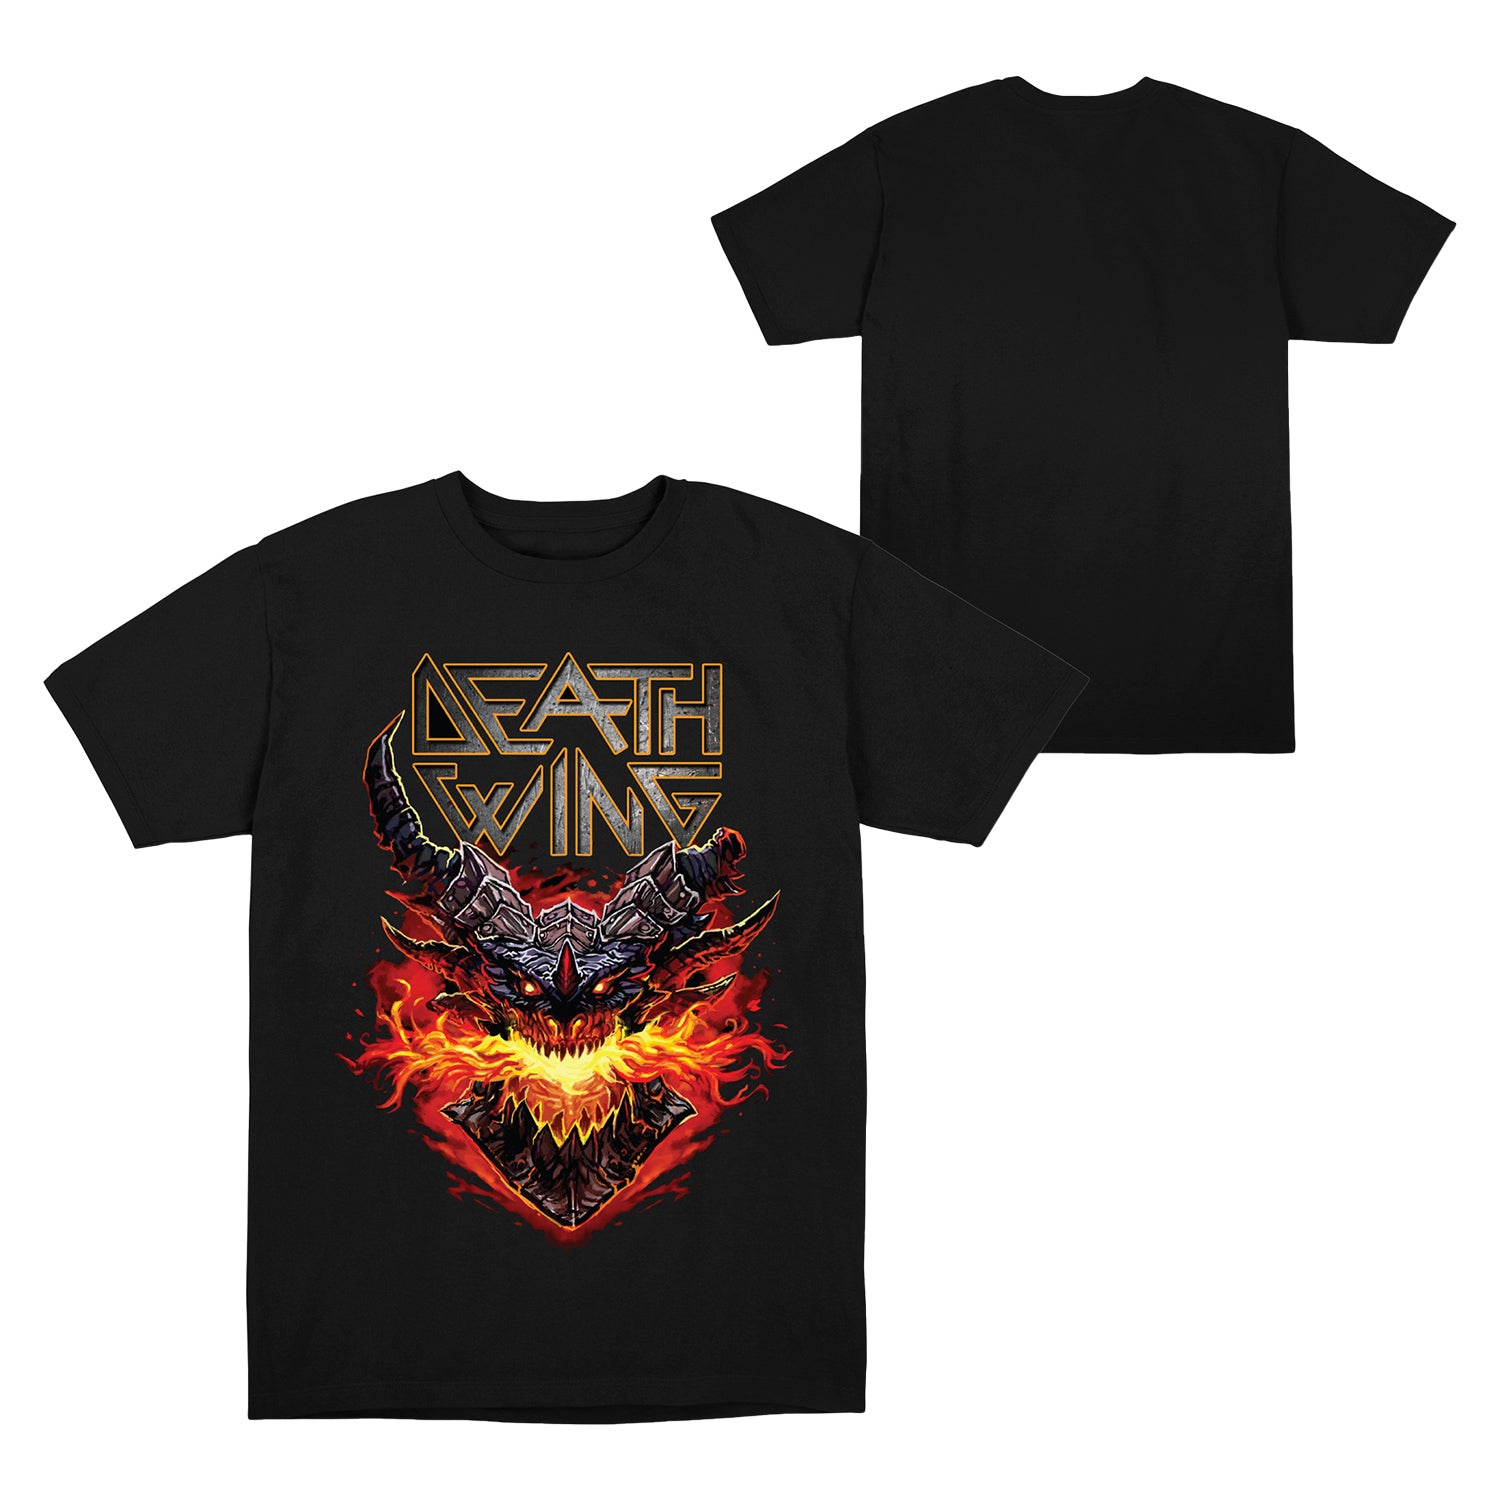 World of Warcraft Deathwing Black T-Shirt - Front and Back View